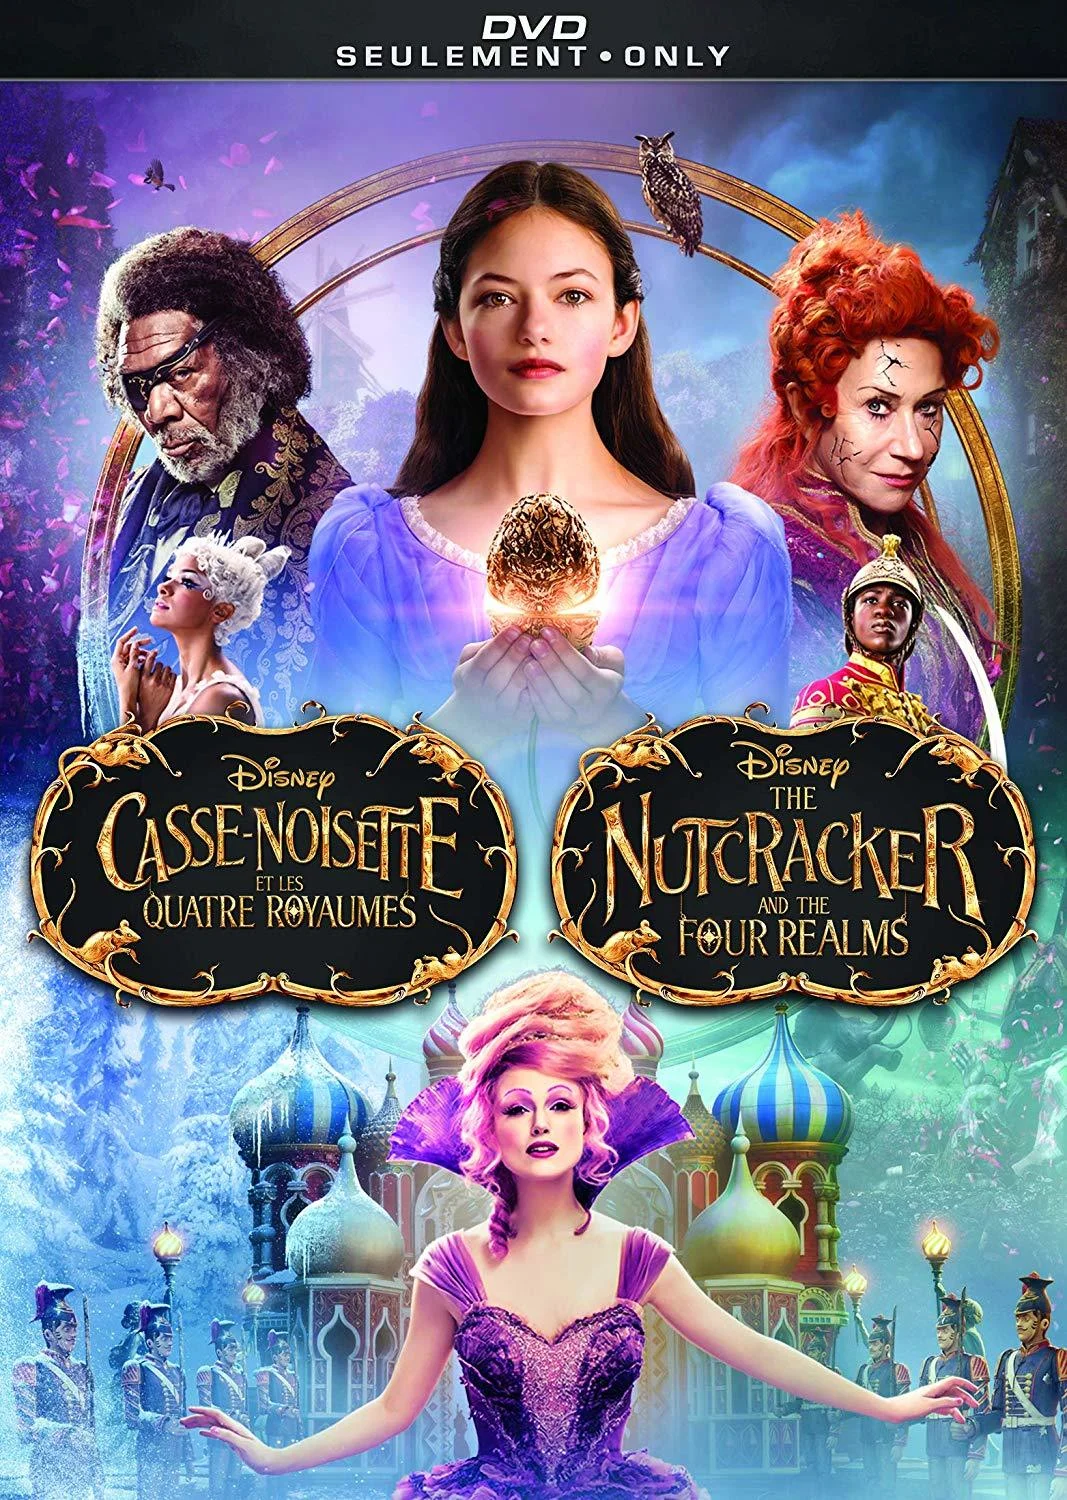 Nutcracker and the Four Realms, The (DVD) – French on MovieShack